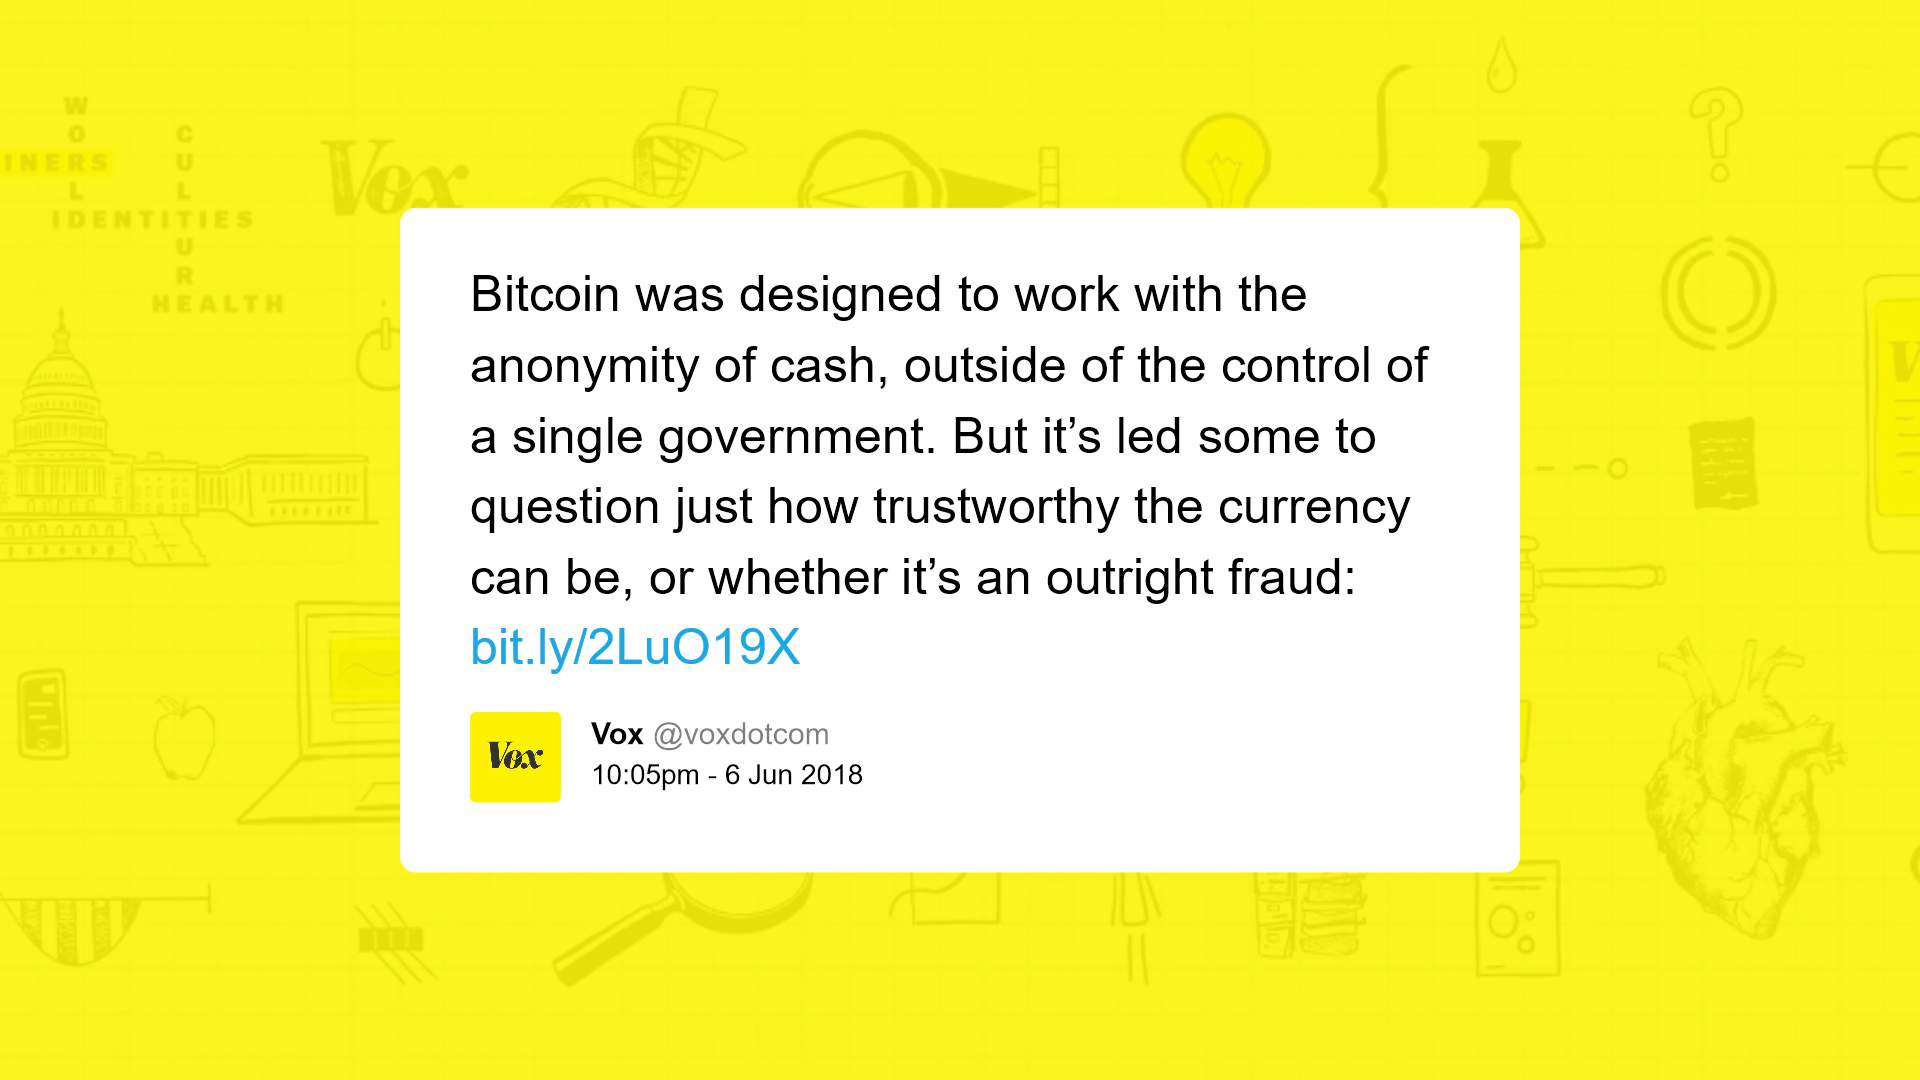 crypto is a scam according to Vox